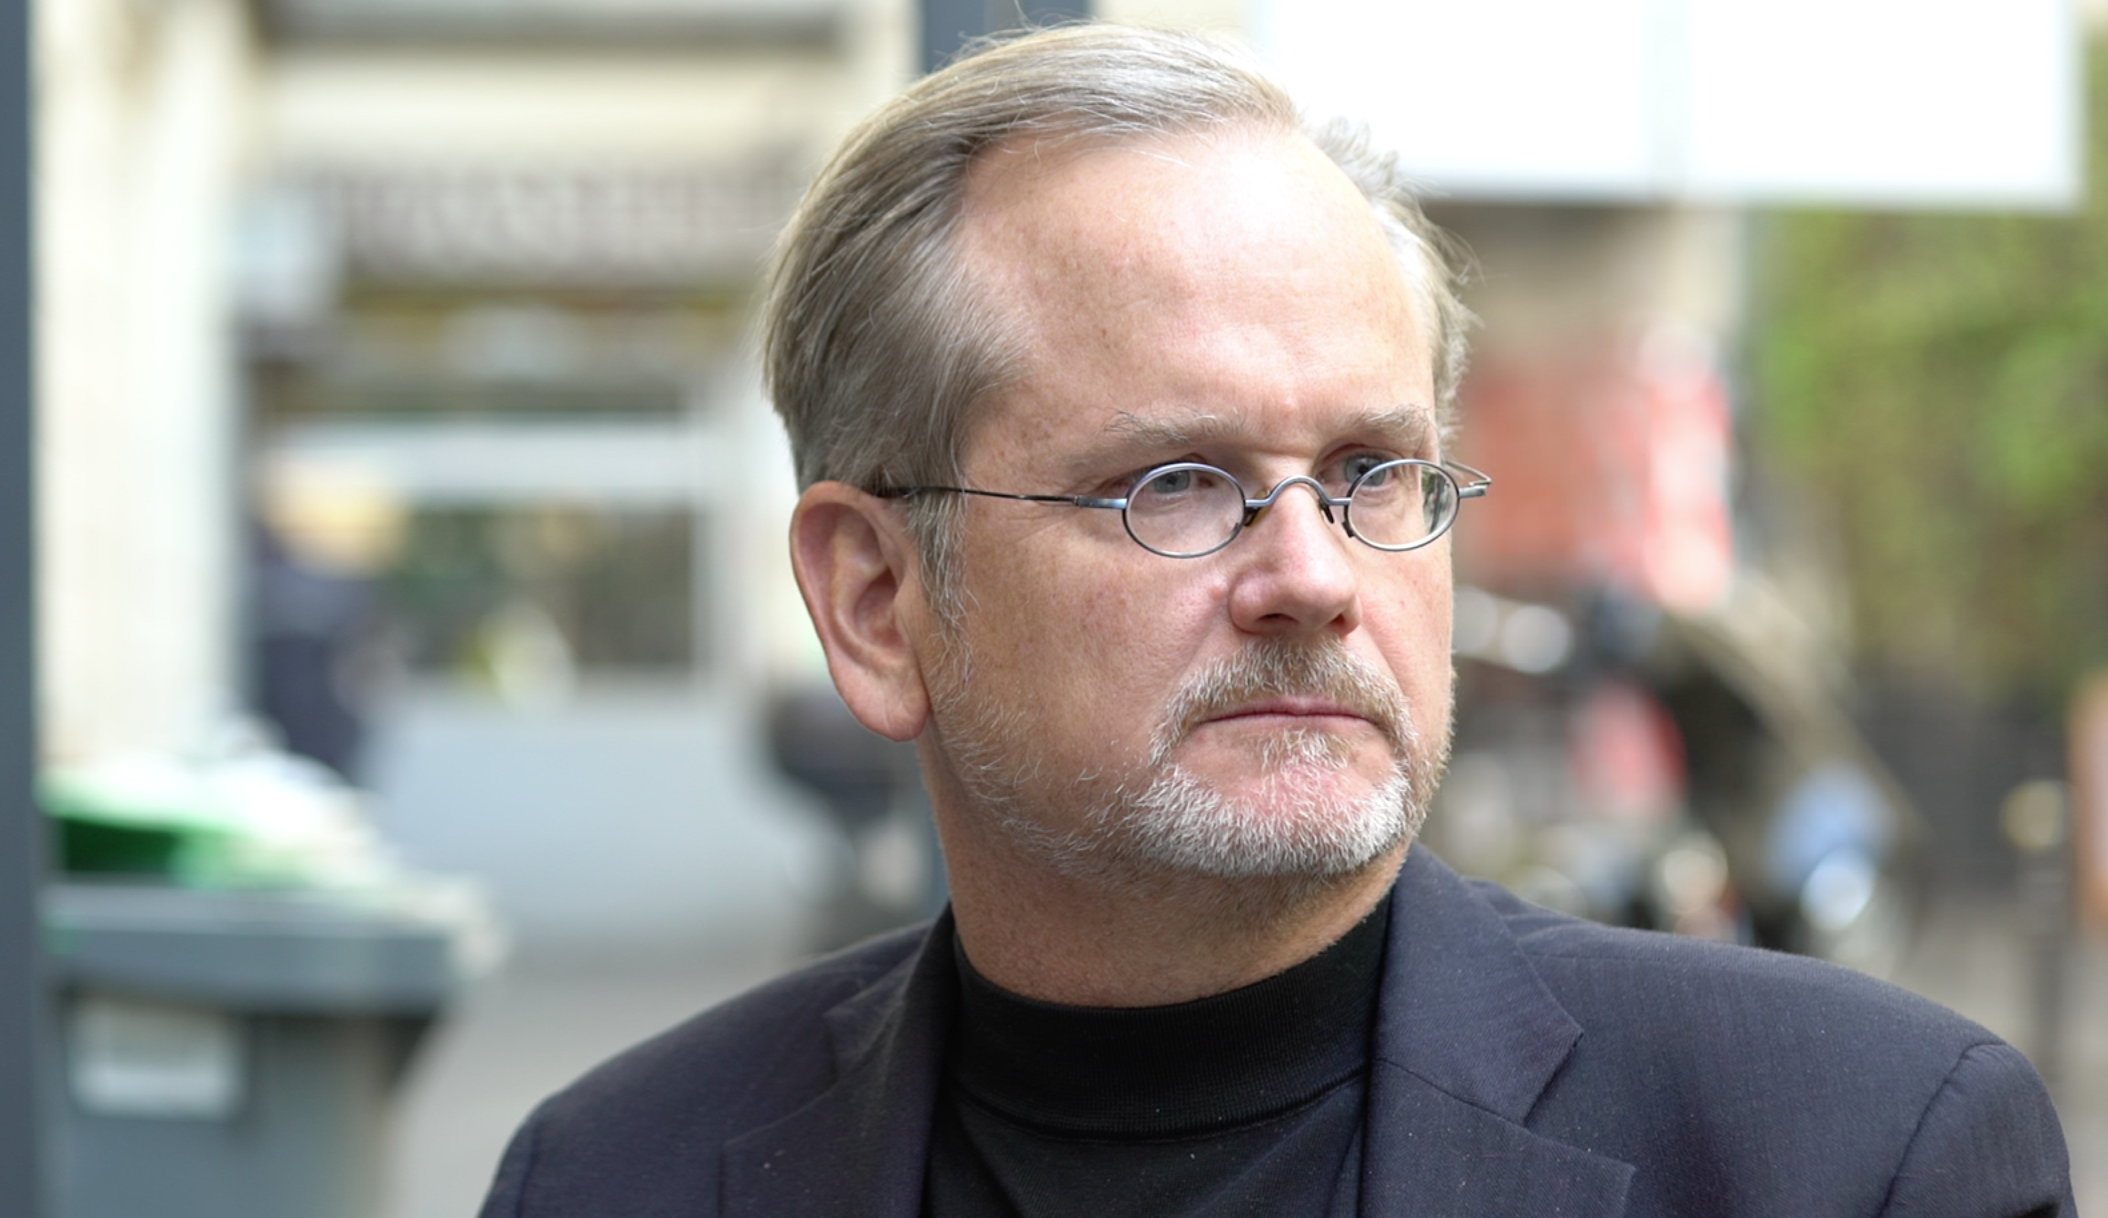 Laurence Lessig